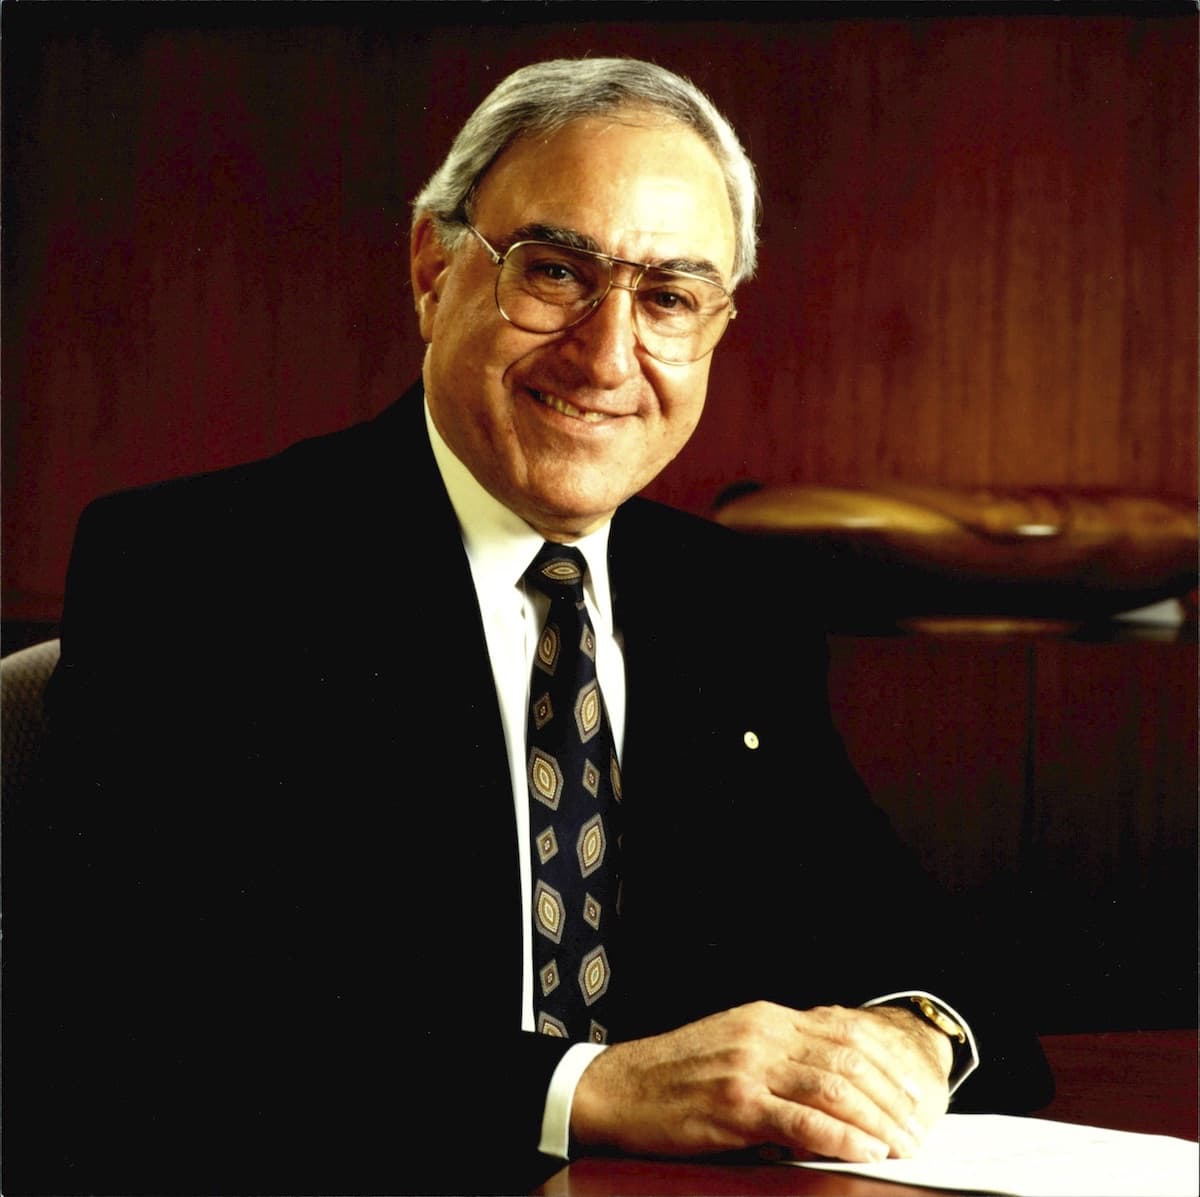 Ken Michael - Commissioner from 1991 to 1997